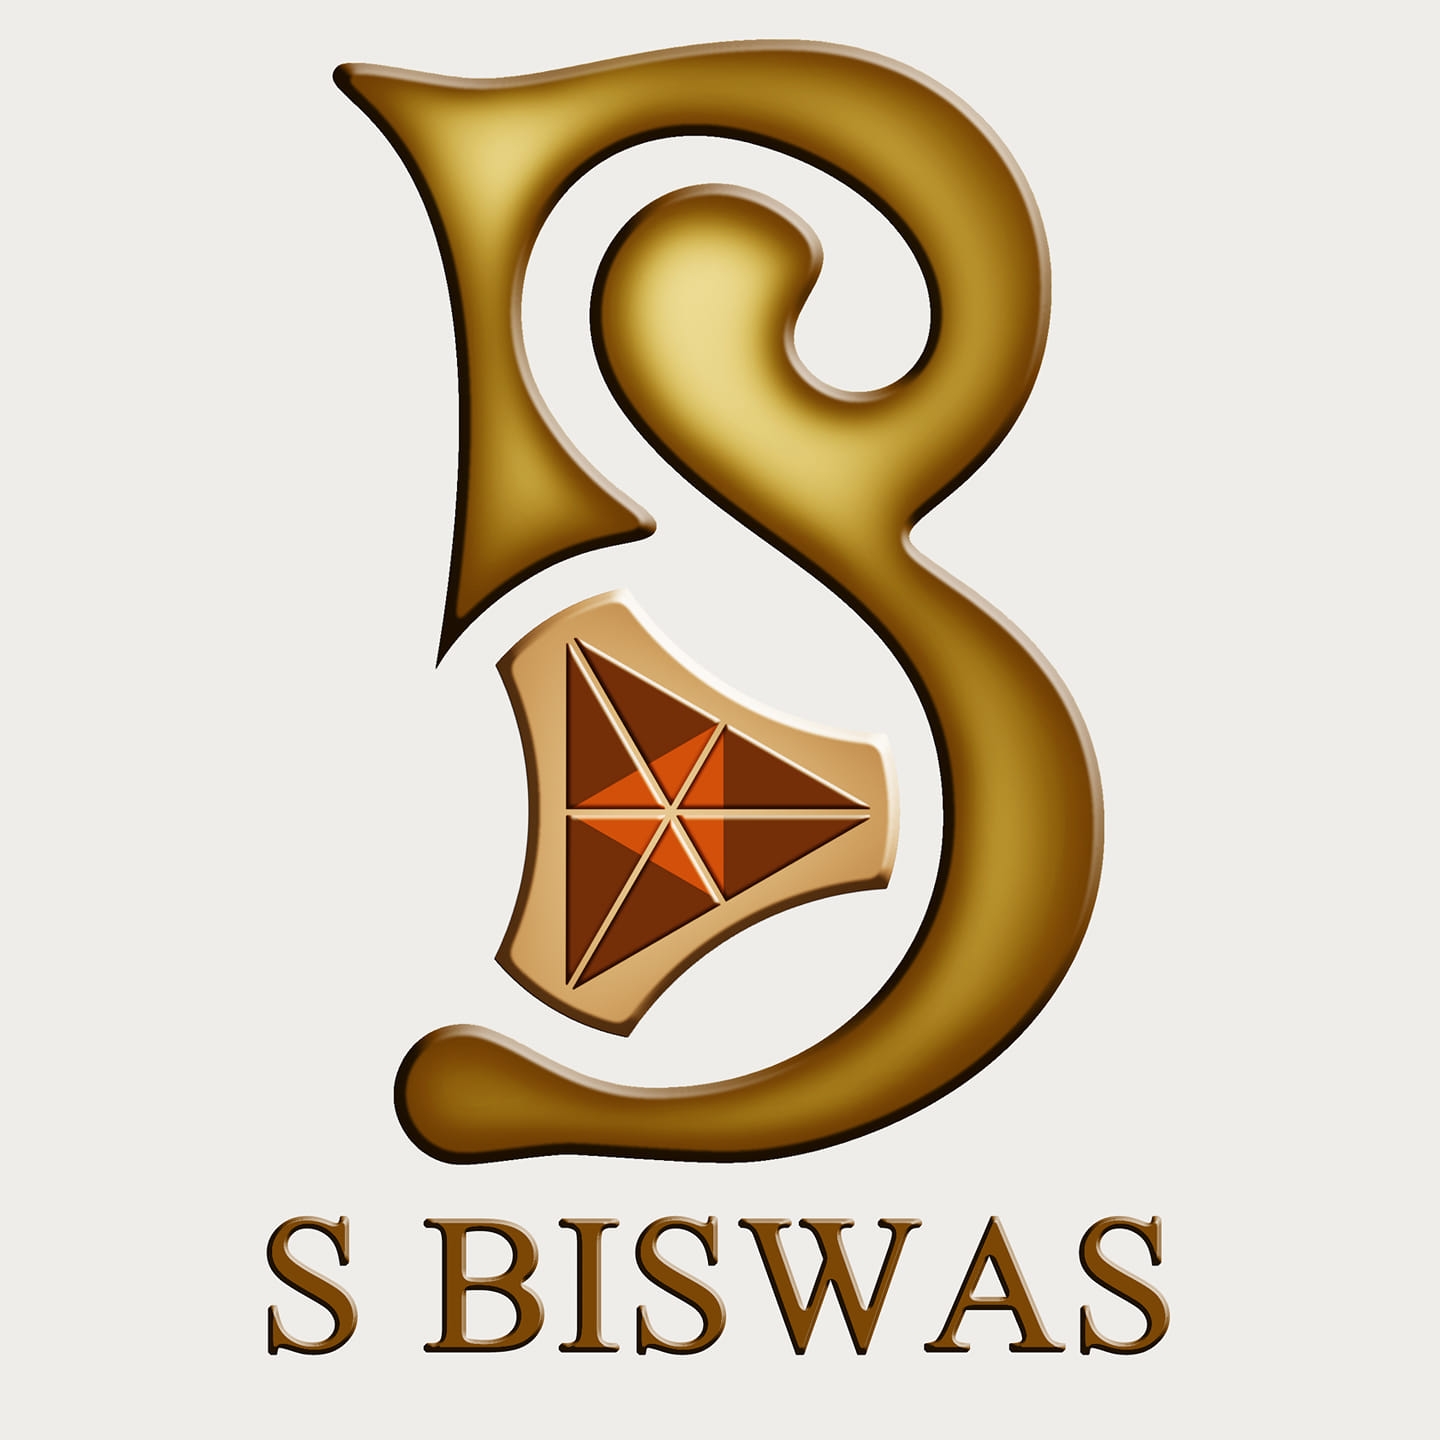 S BISWAS - The Art of Living - Logo